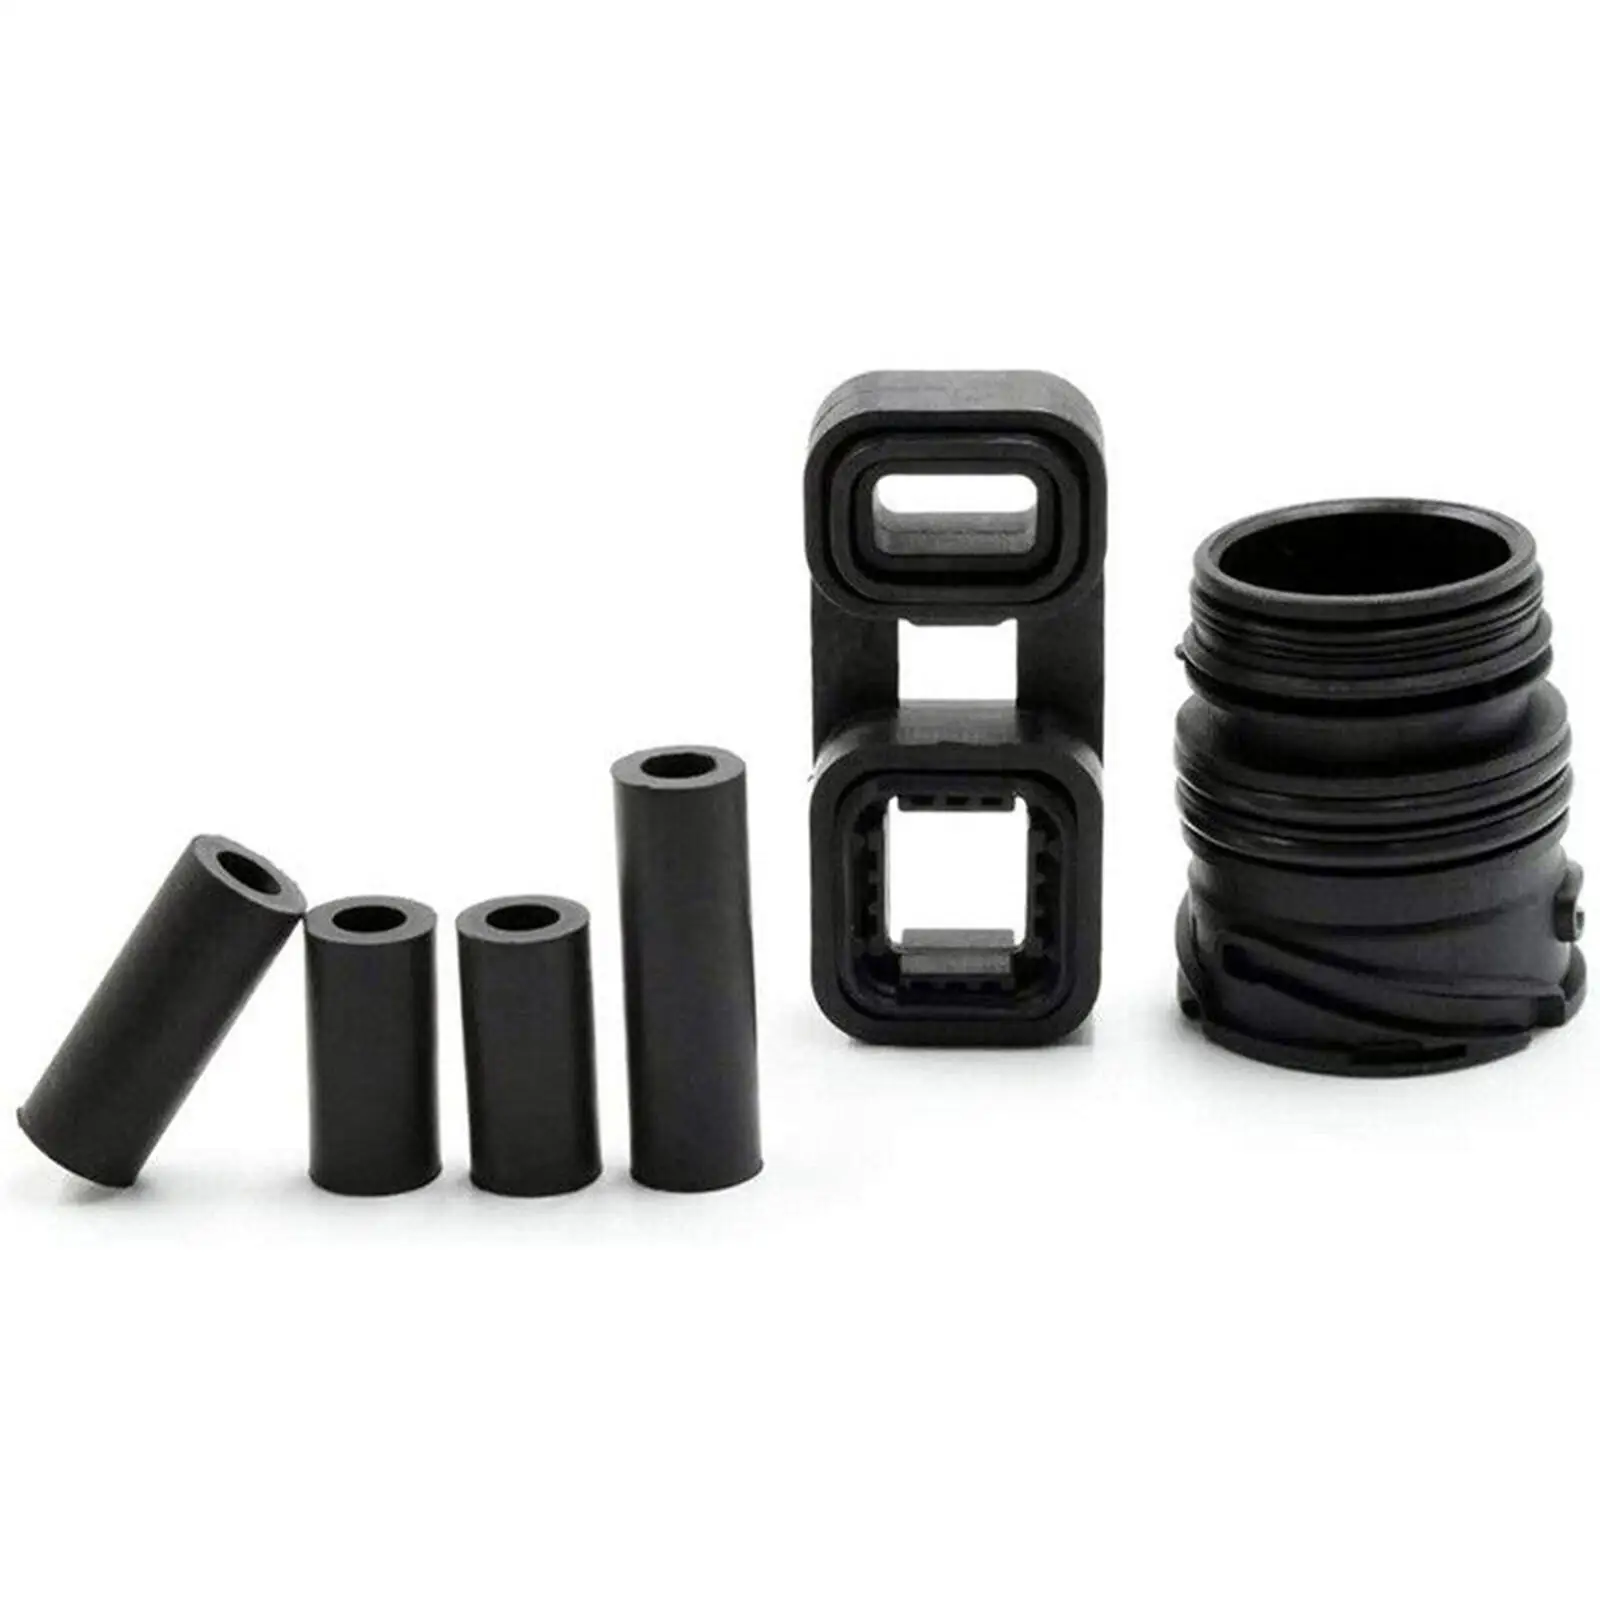 Valve Body Sleeve Connector Seal Kit Replaces Durable Premium for BMW 1 Series